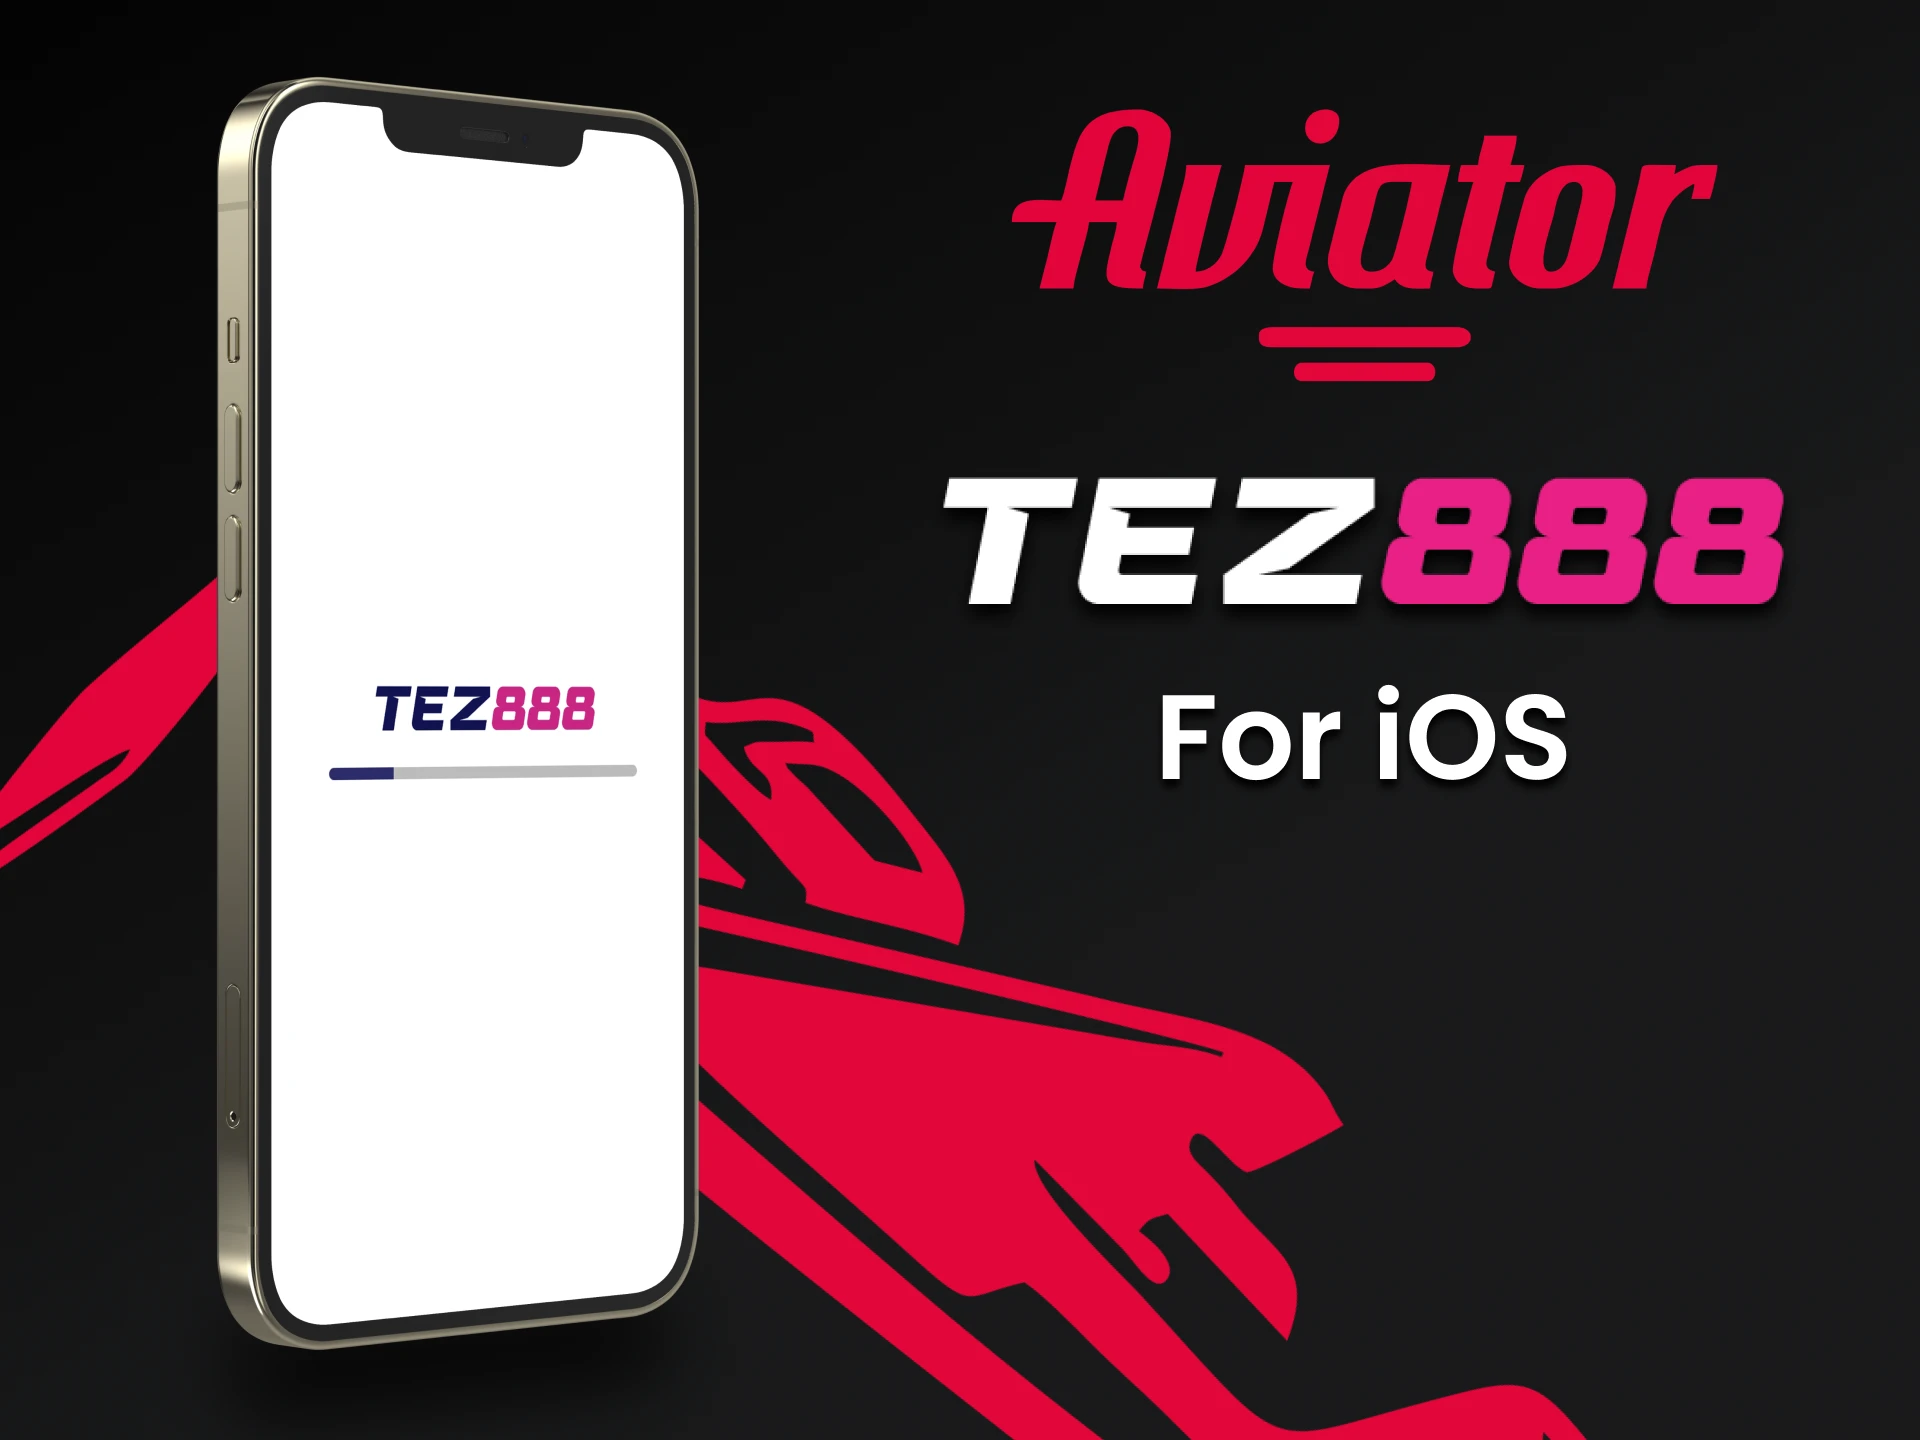 To play Aviator, download the Tez888 application on iOS.